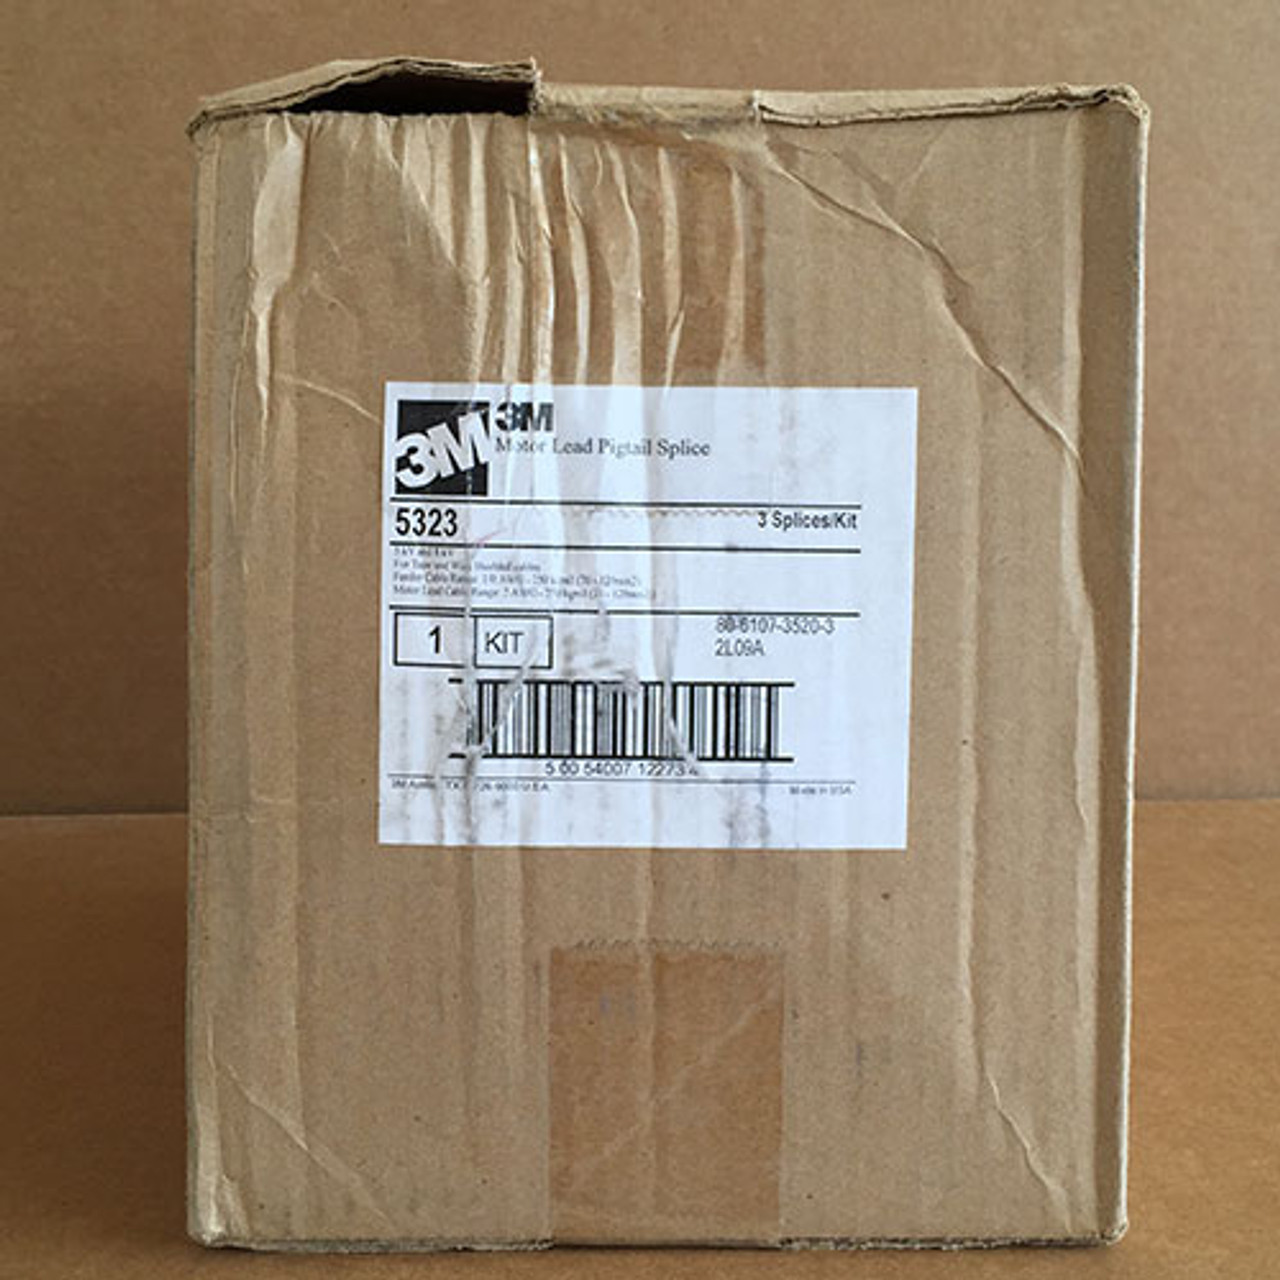 3M 5322 MOTOR LEAD PIGTAIL SPLICE KIT NEW CONDITION IN PACKAGE 